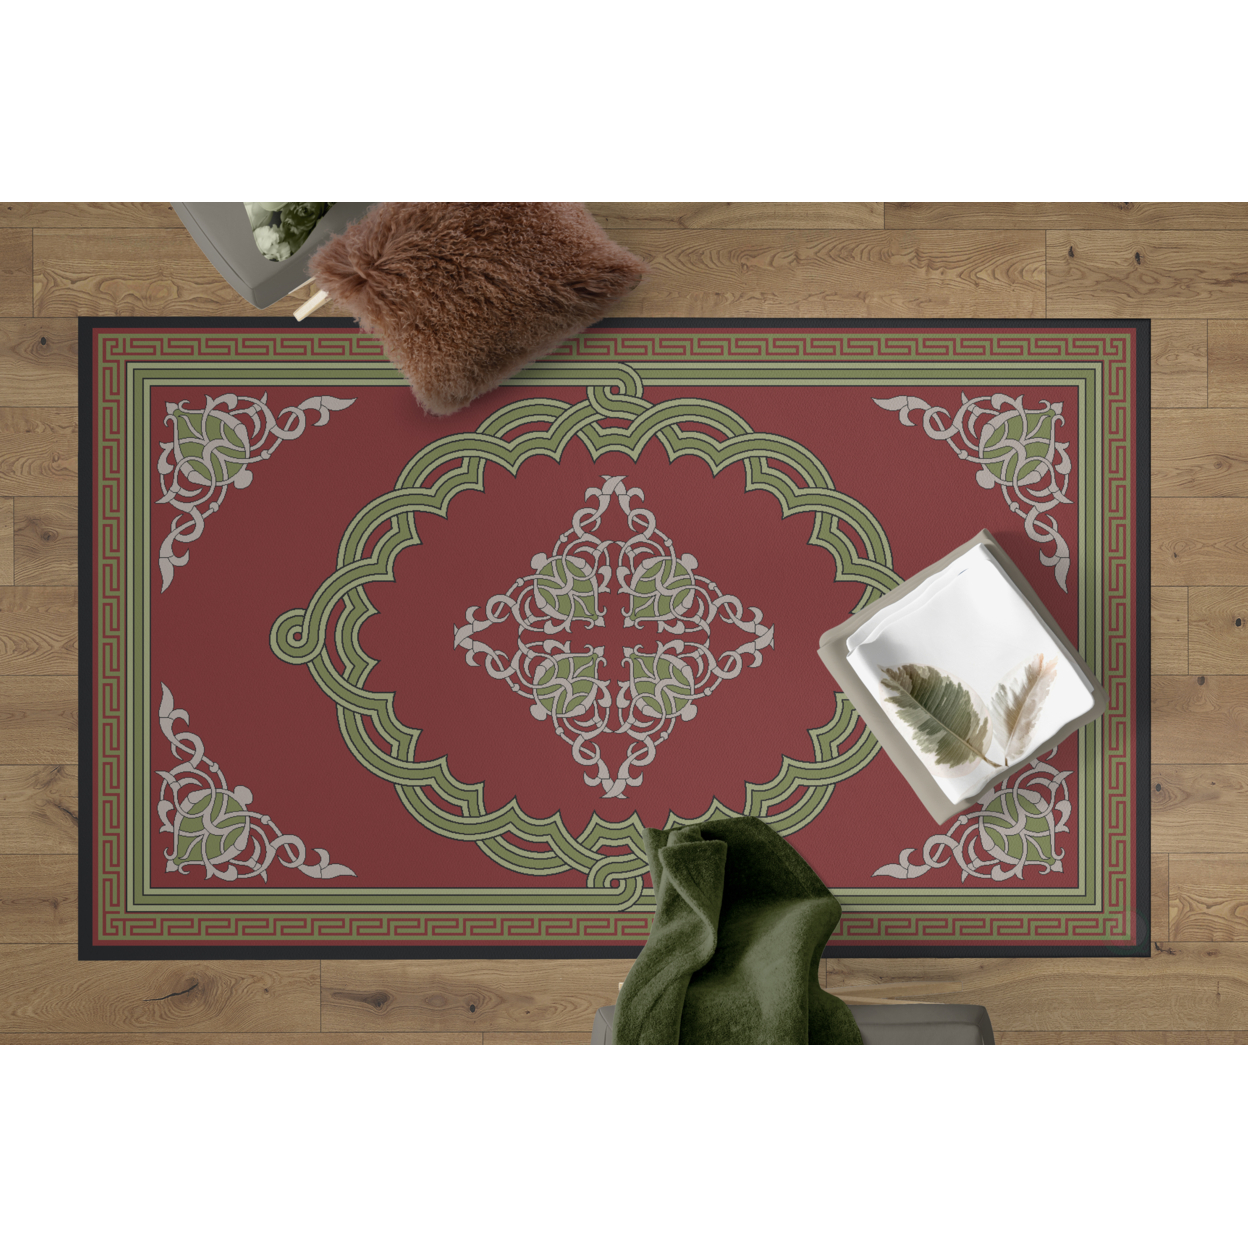 Deerlux Transitional Living Room Area Rug With Nonslip Backing, Red Medallion Pattern - 5 X 7